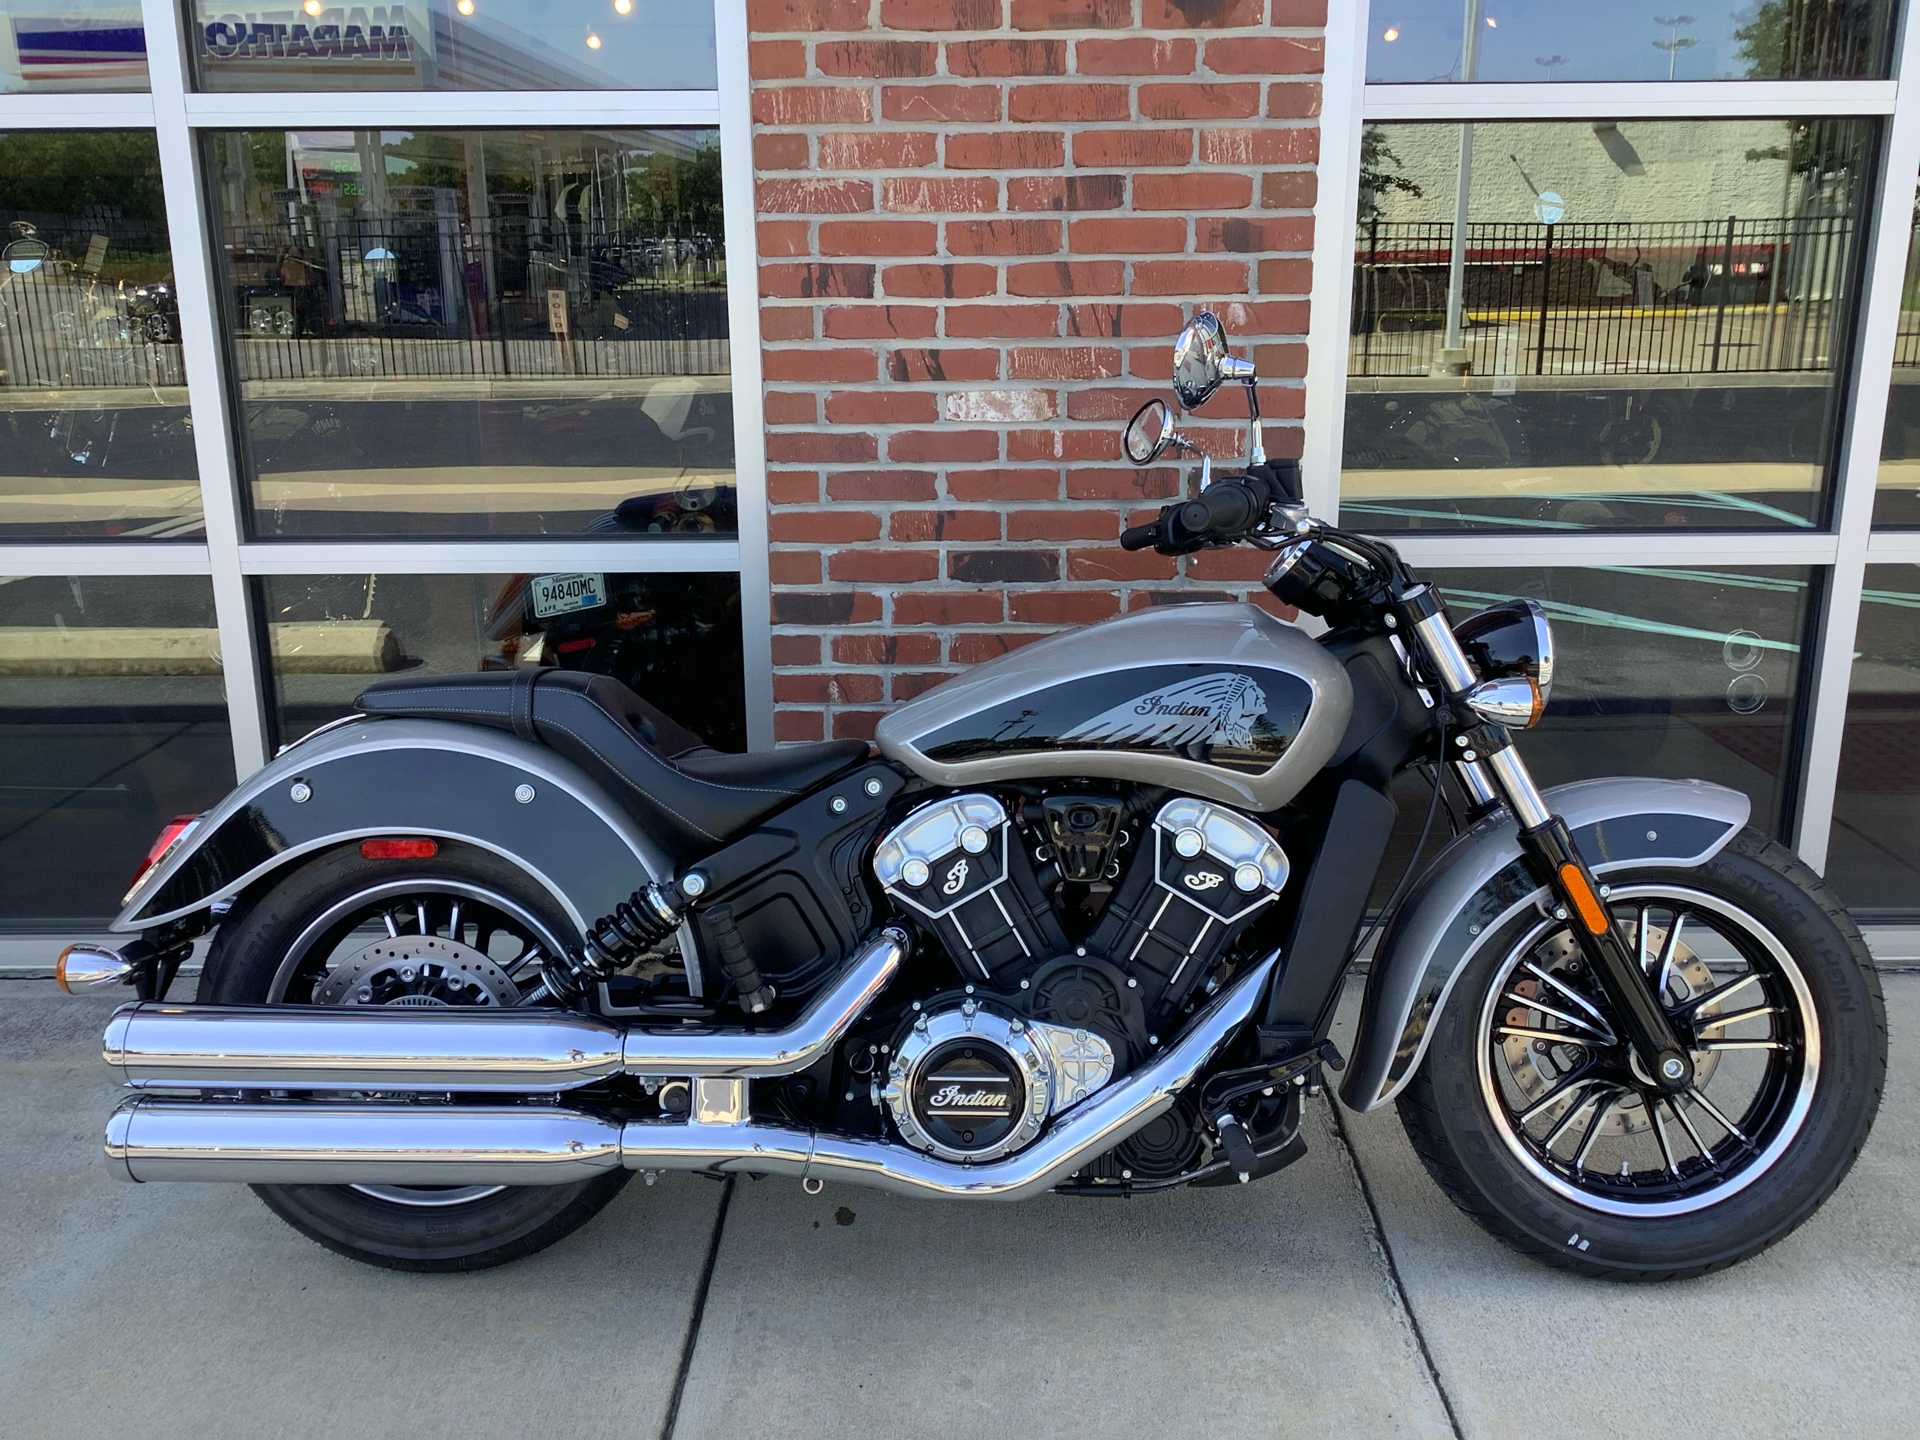 2022 Indian Scout® ABS in Newport News, Virginia - Photo 1